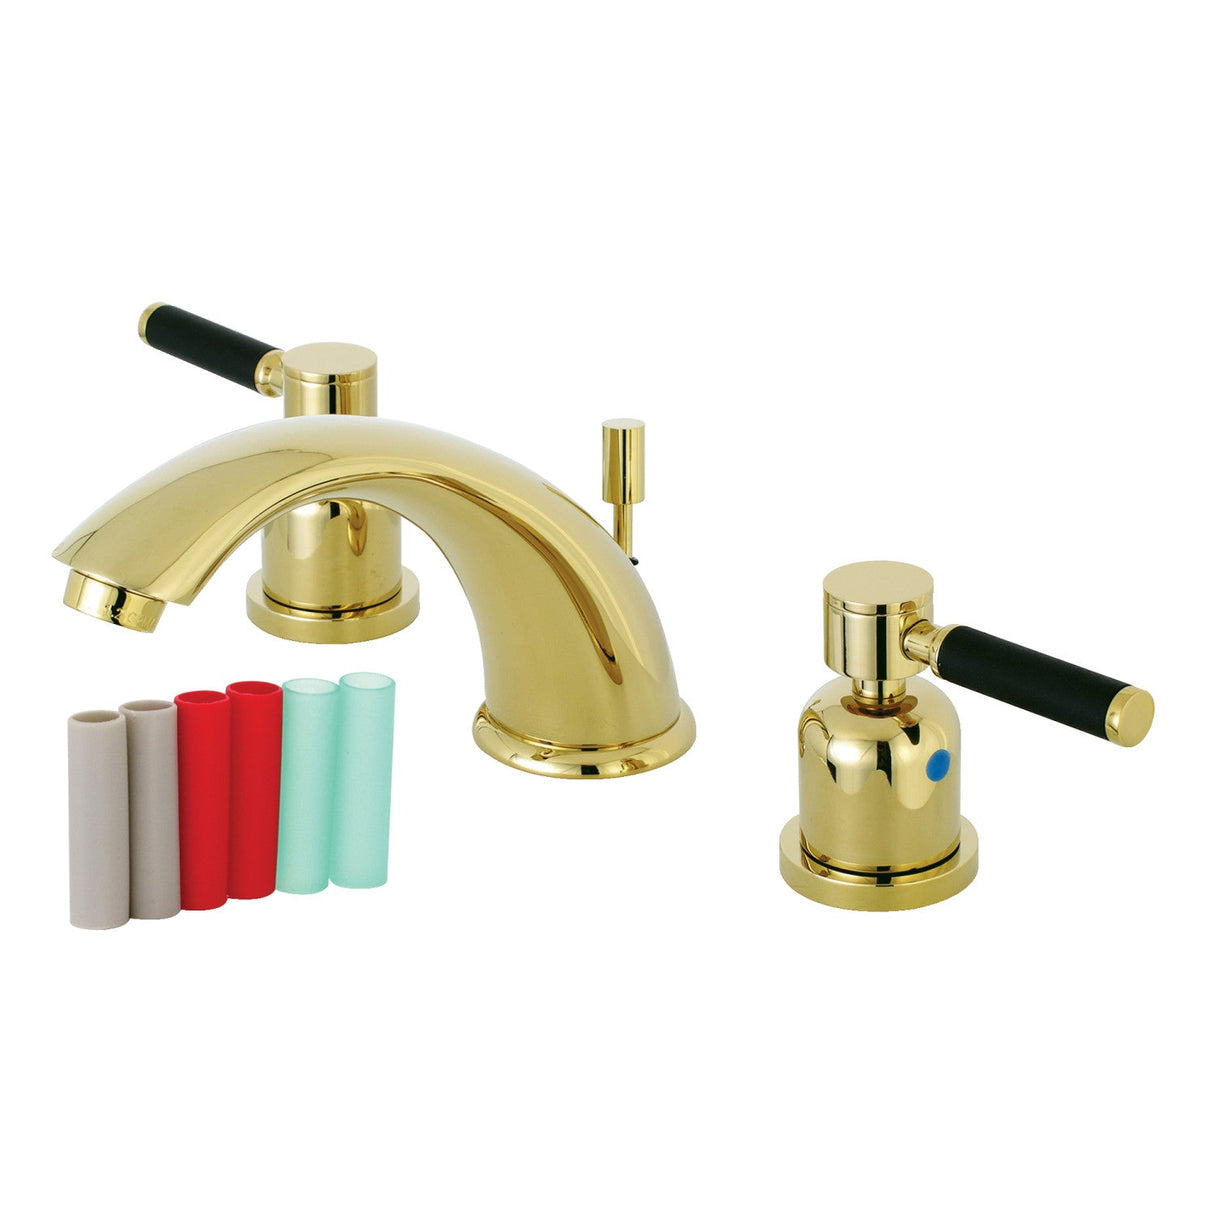 Kaiser KB8962DKL Two-Handle 3-Hole Deck Mount Widespread Bathroom Faucet with Plastic Pop-Up, Polished Brass